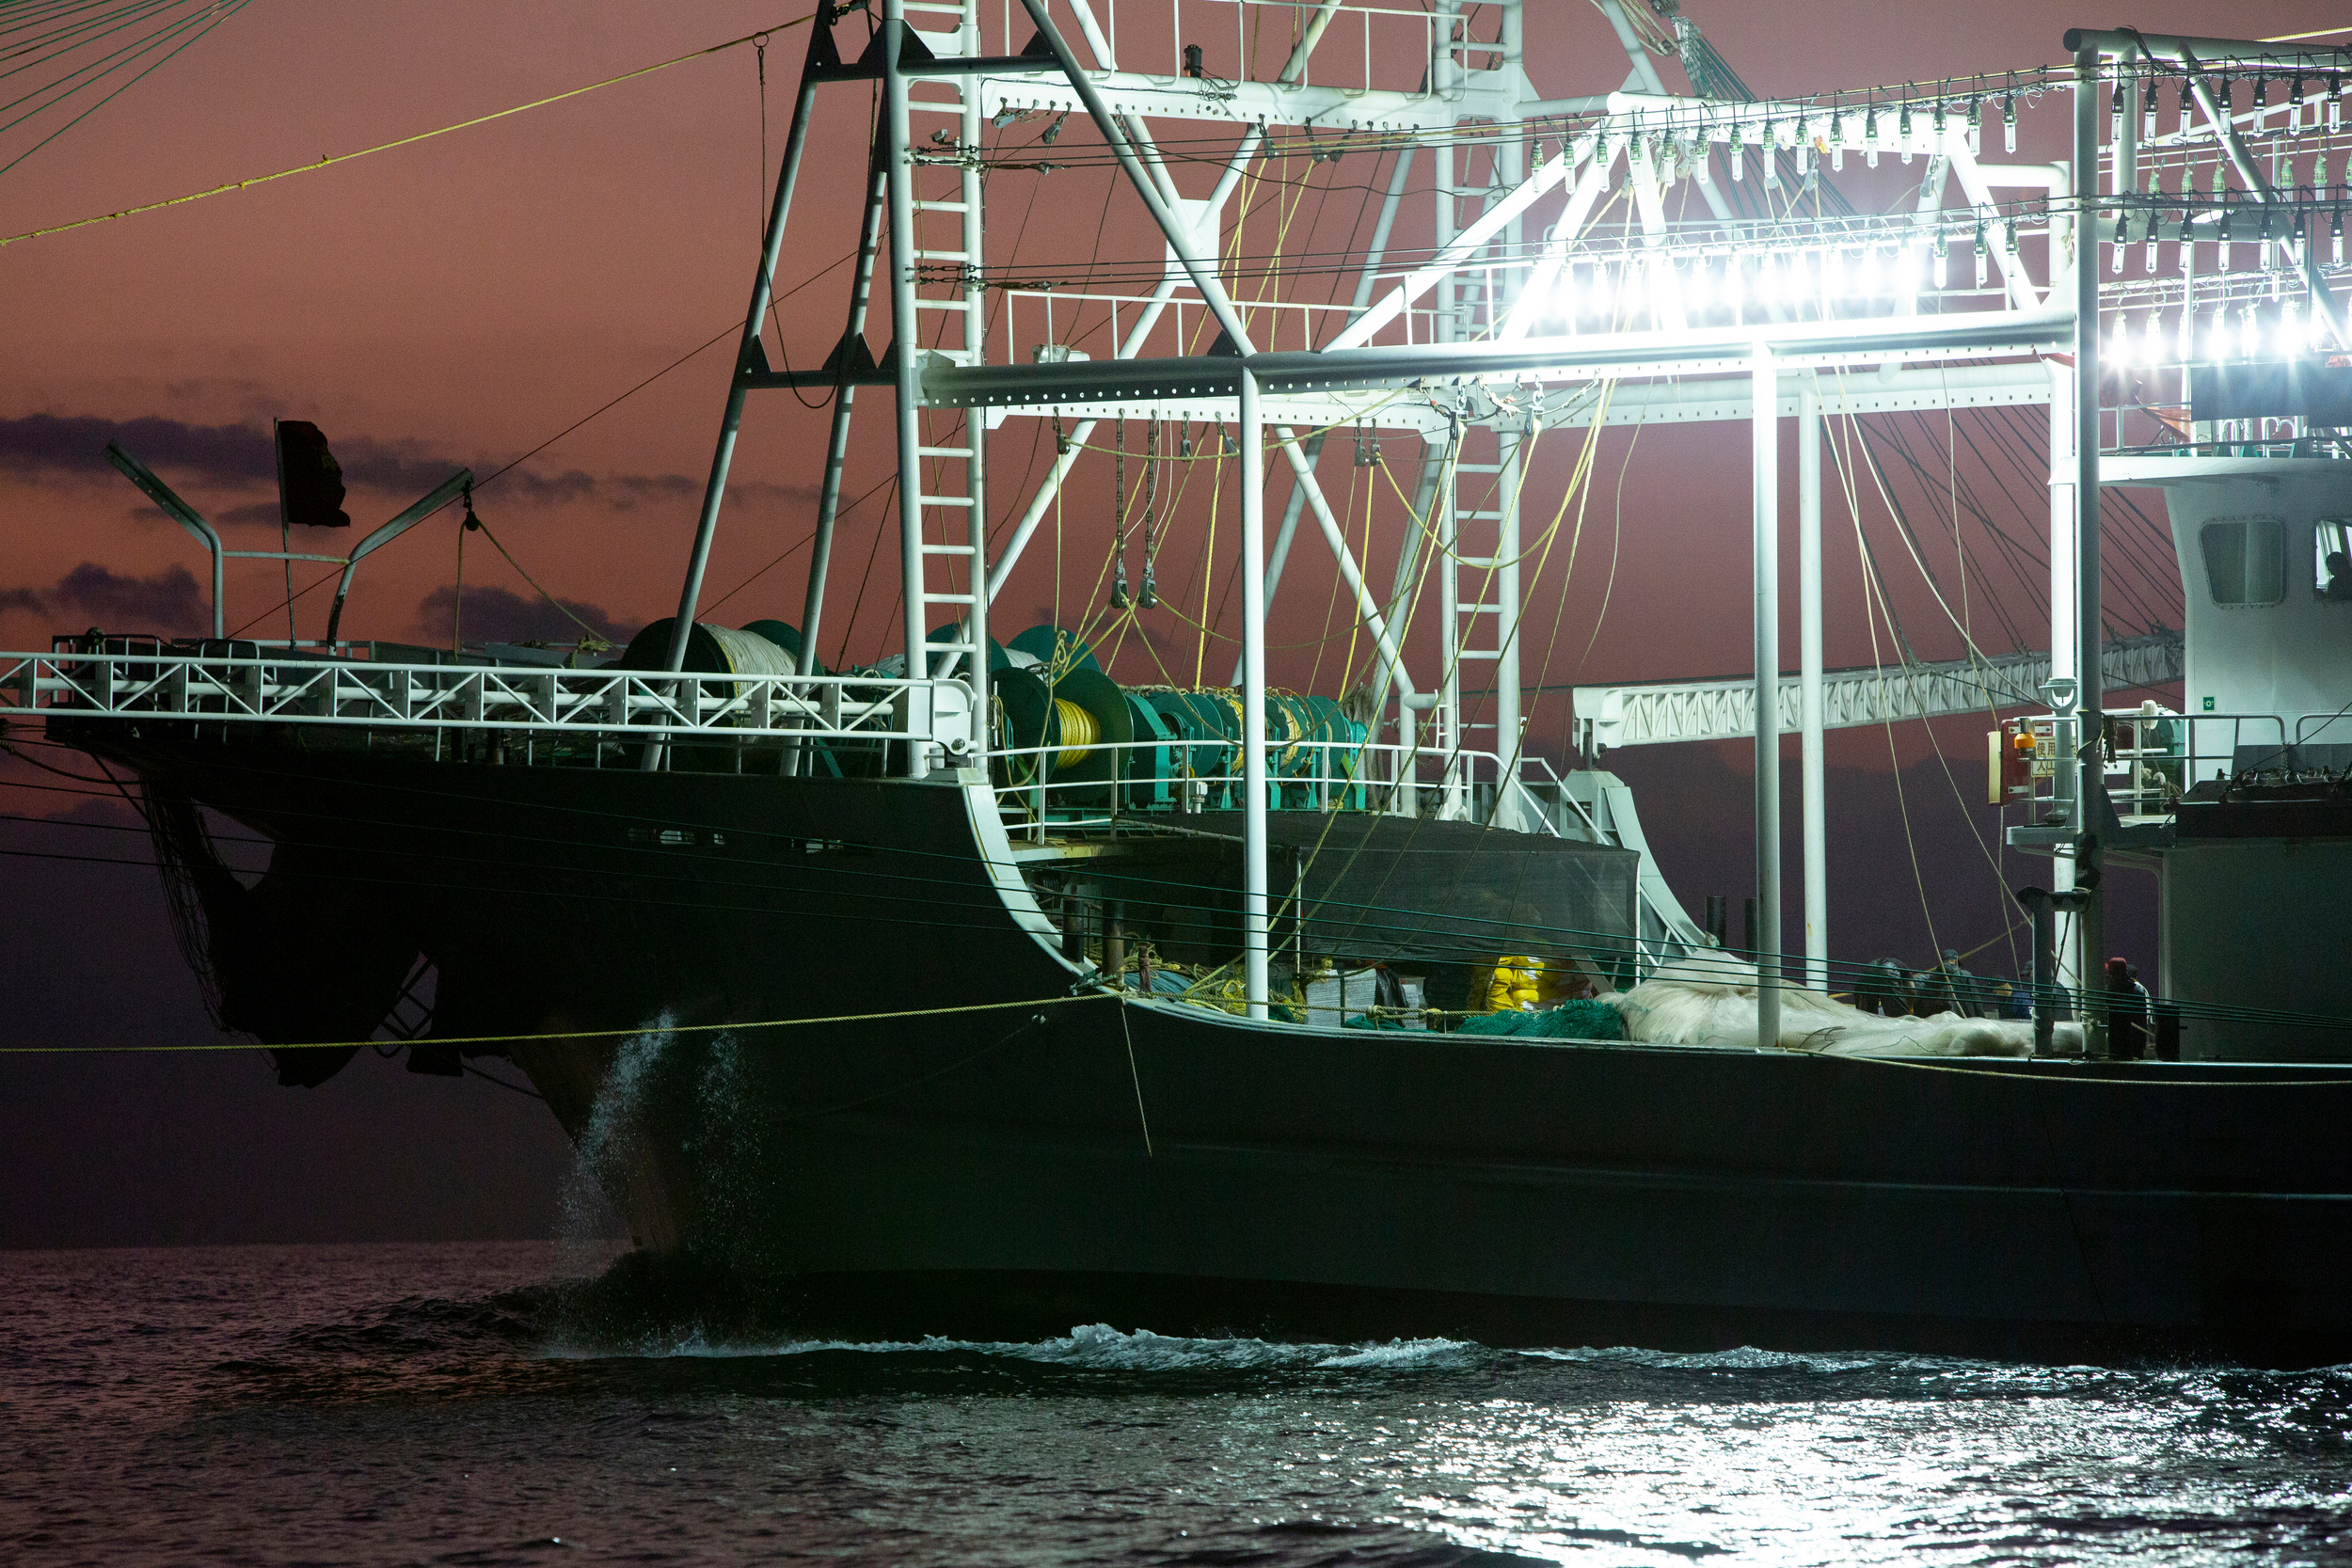 Squid fishing boat shines its lights brightly onto the sea